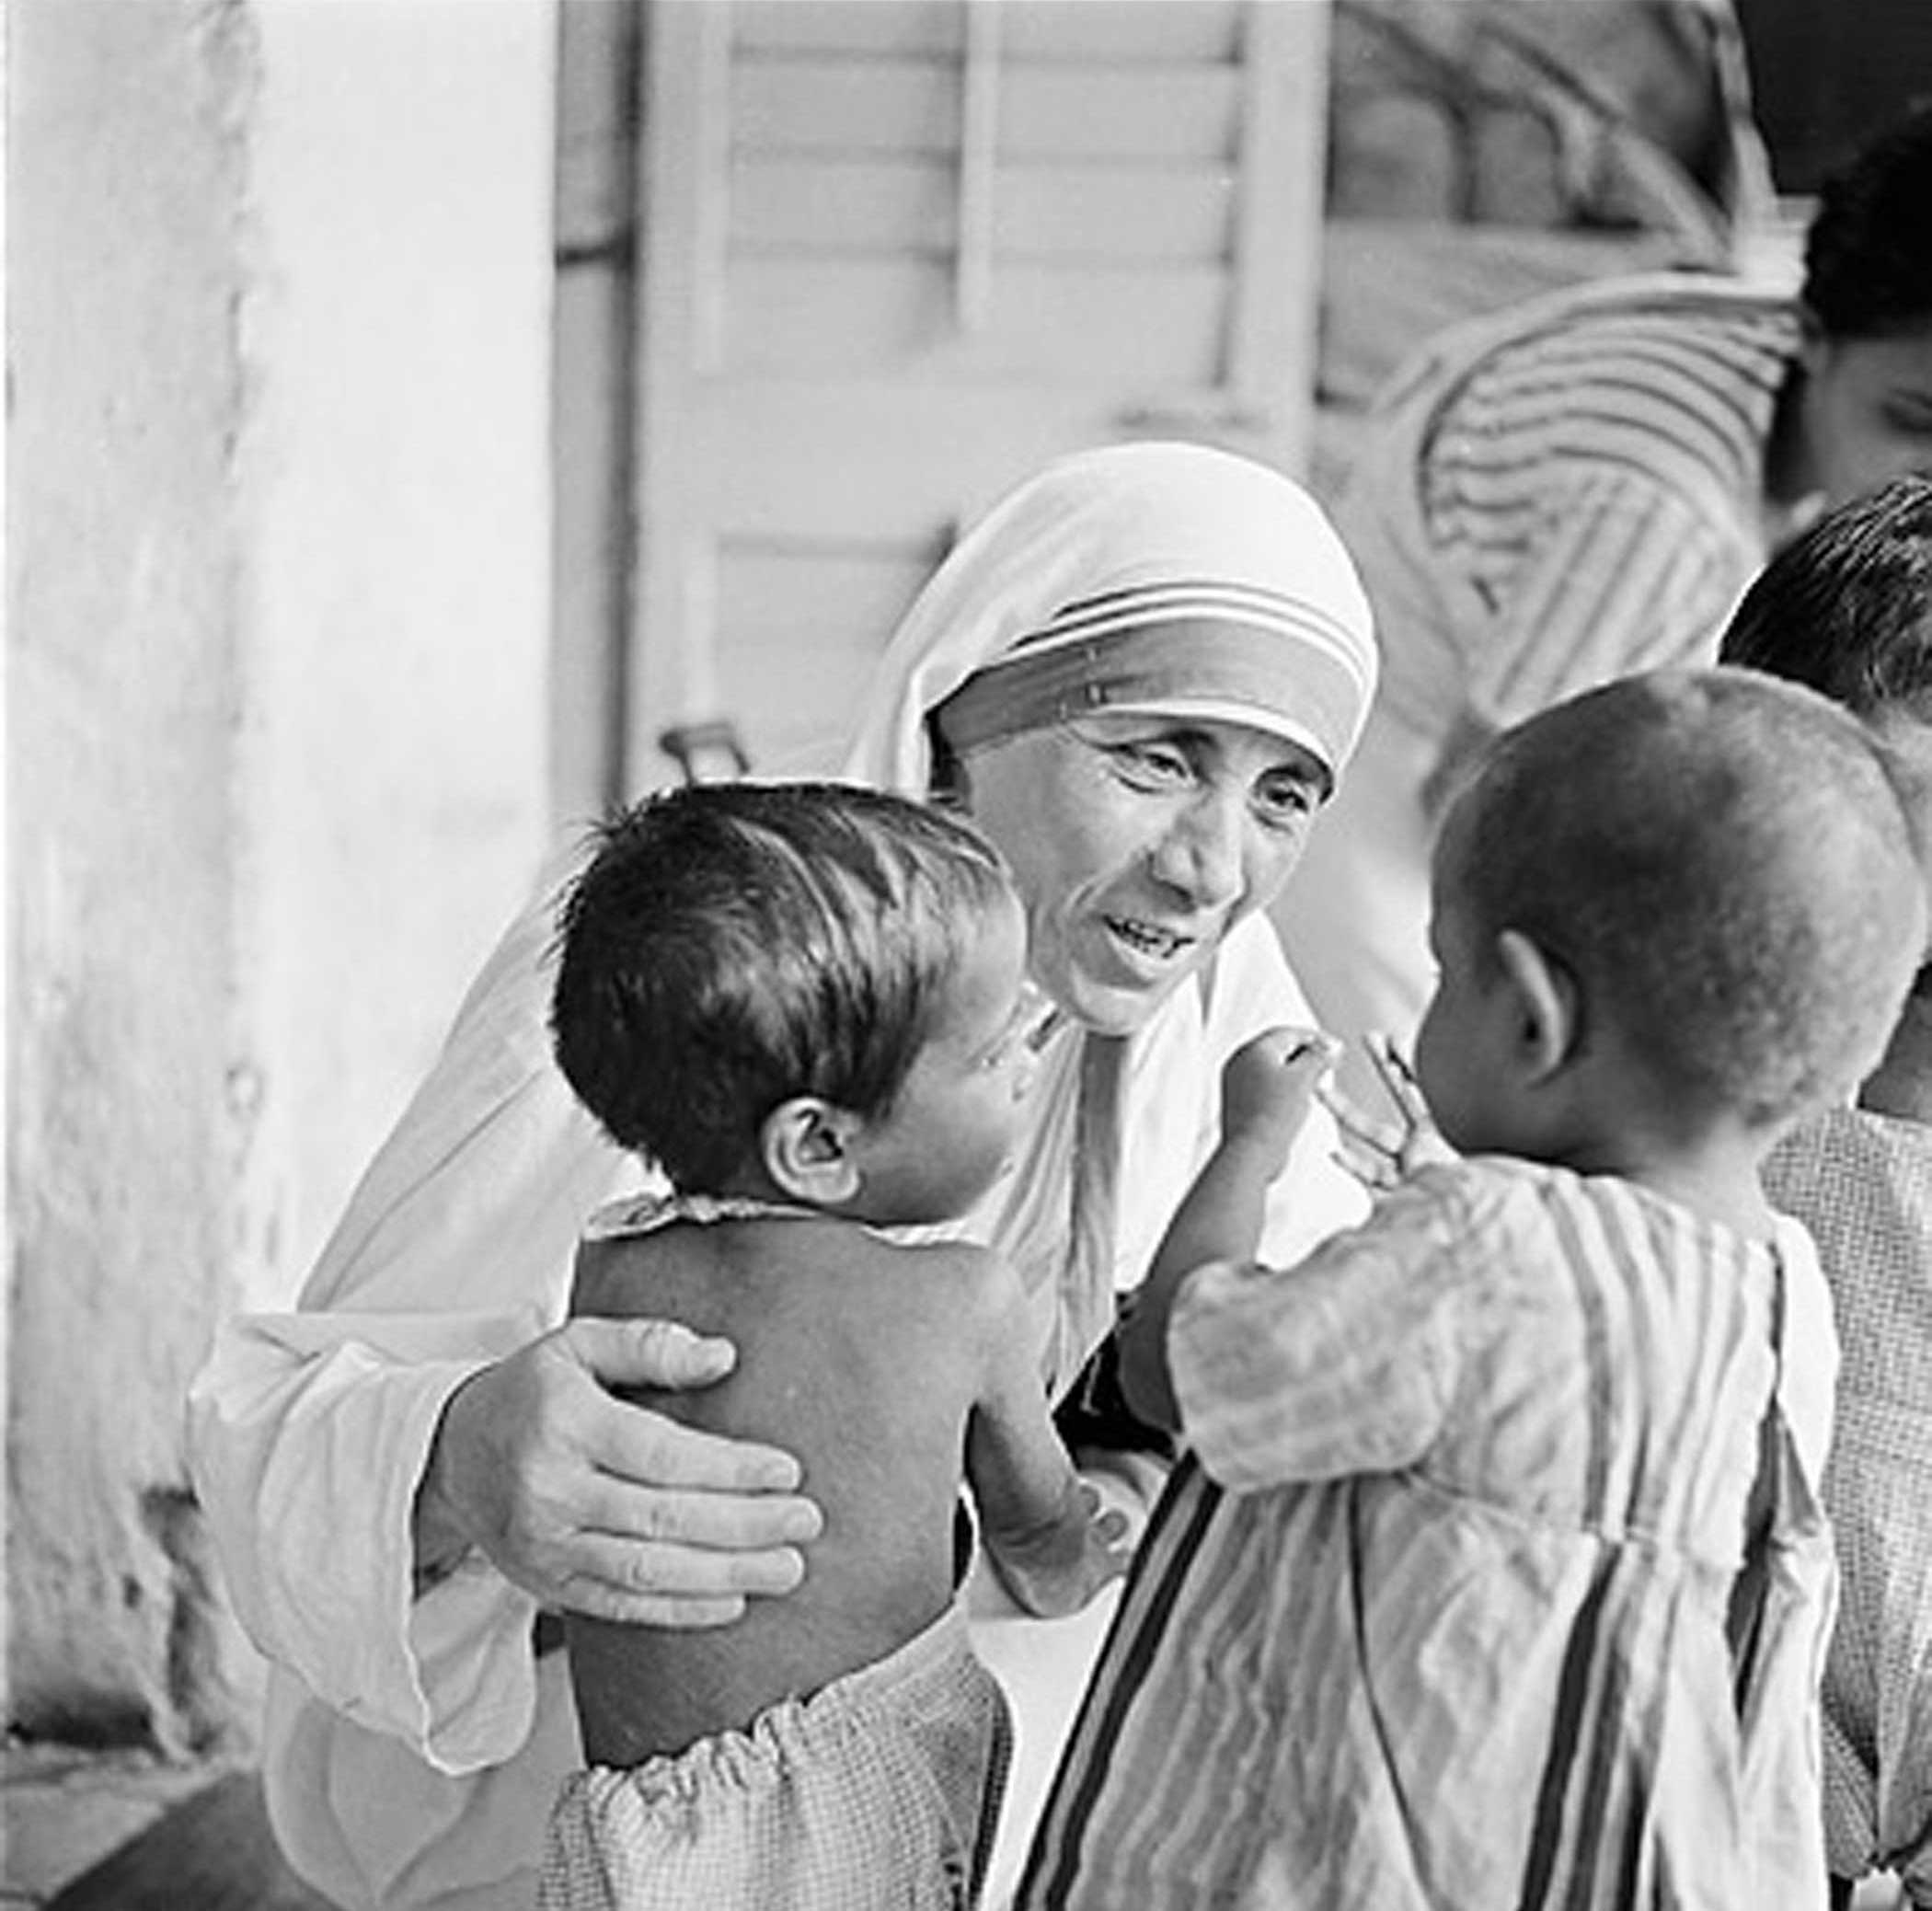 In 1948, when she was 38 years old, Teresa departed the convent in India she had been living in and set out to create her own ministry, the Missionaries of Charity, where she attended to the most forsaken souls in Calcutta — the sick, the dying, the leprous. On top of that, she reached out to the city's many homeless children of the city, giving them shelter and love. The home she opened to welcome them, Nirmala Shishu Bhavan, above, admitted any child who arrived there.